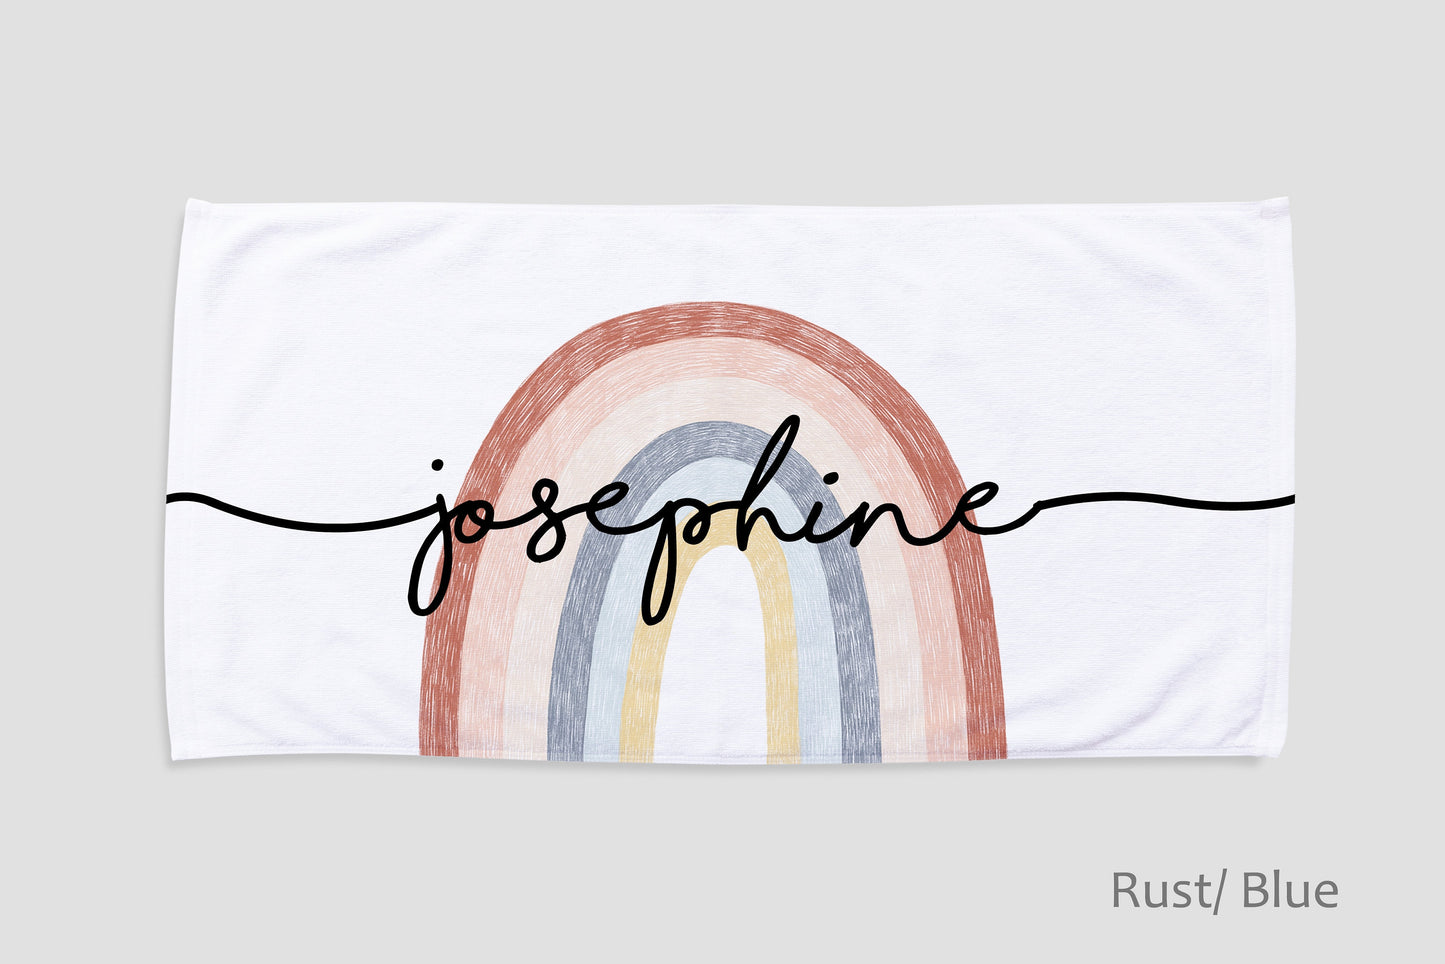 Personalized Round Rainbow Design Beach Towel Personalized Name Bath Towel Custom Pool Towel Beach Towel With Name Outside Birthday Vacation